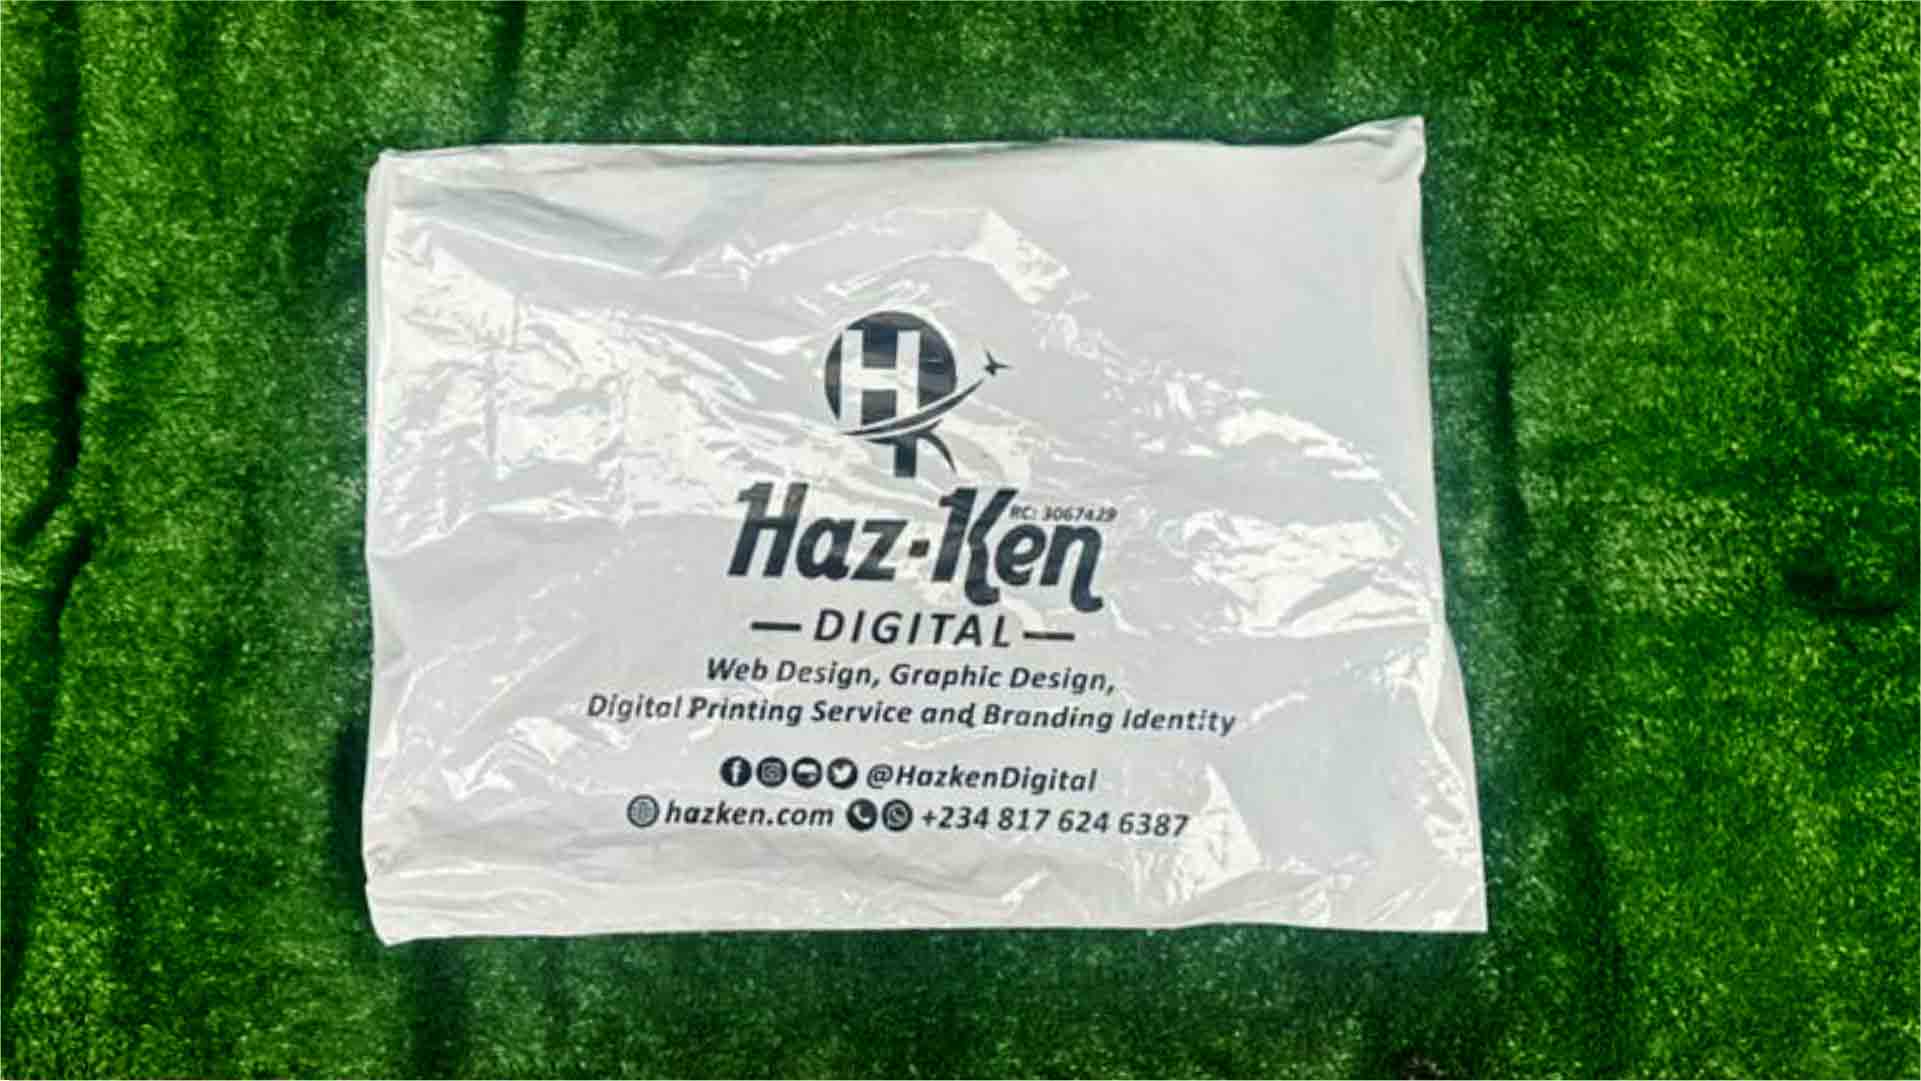 A2 Courier Nylon Bag Design and Printing in Lagos Nigeria